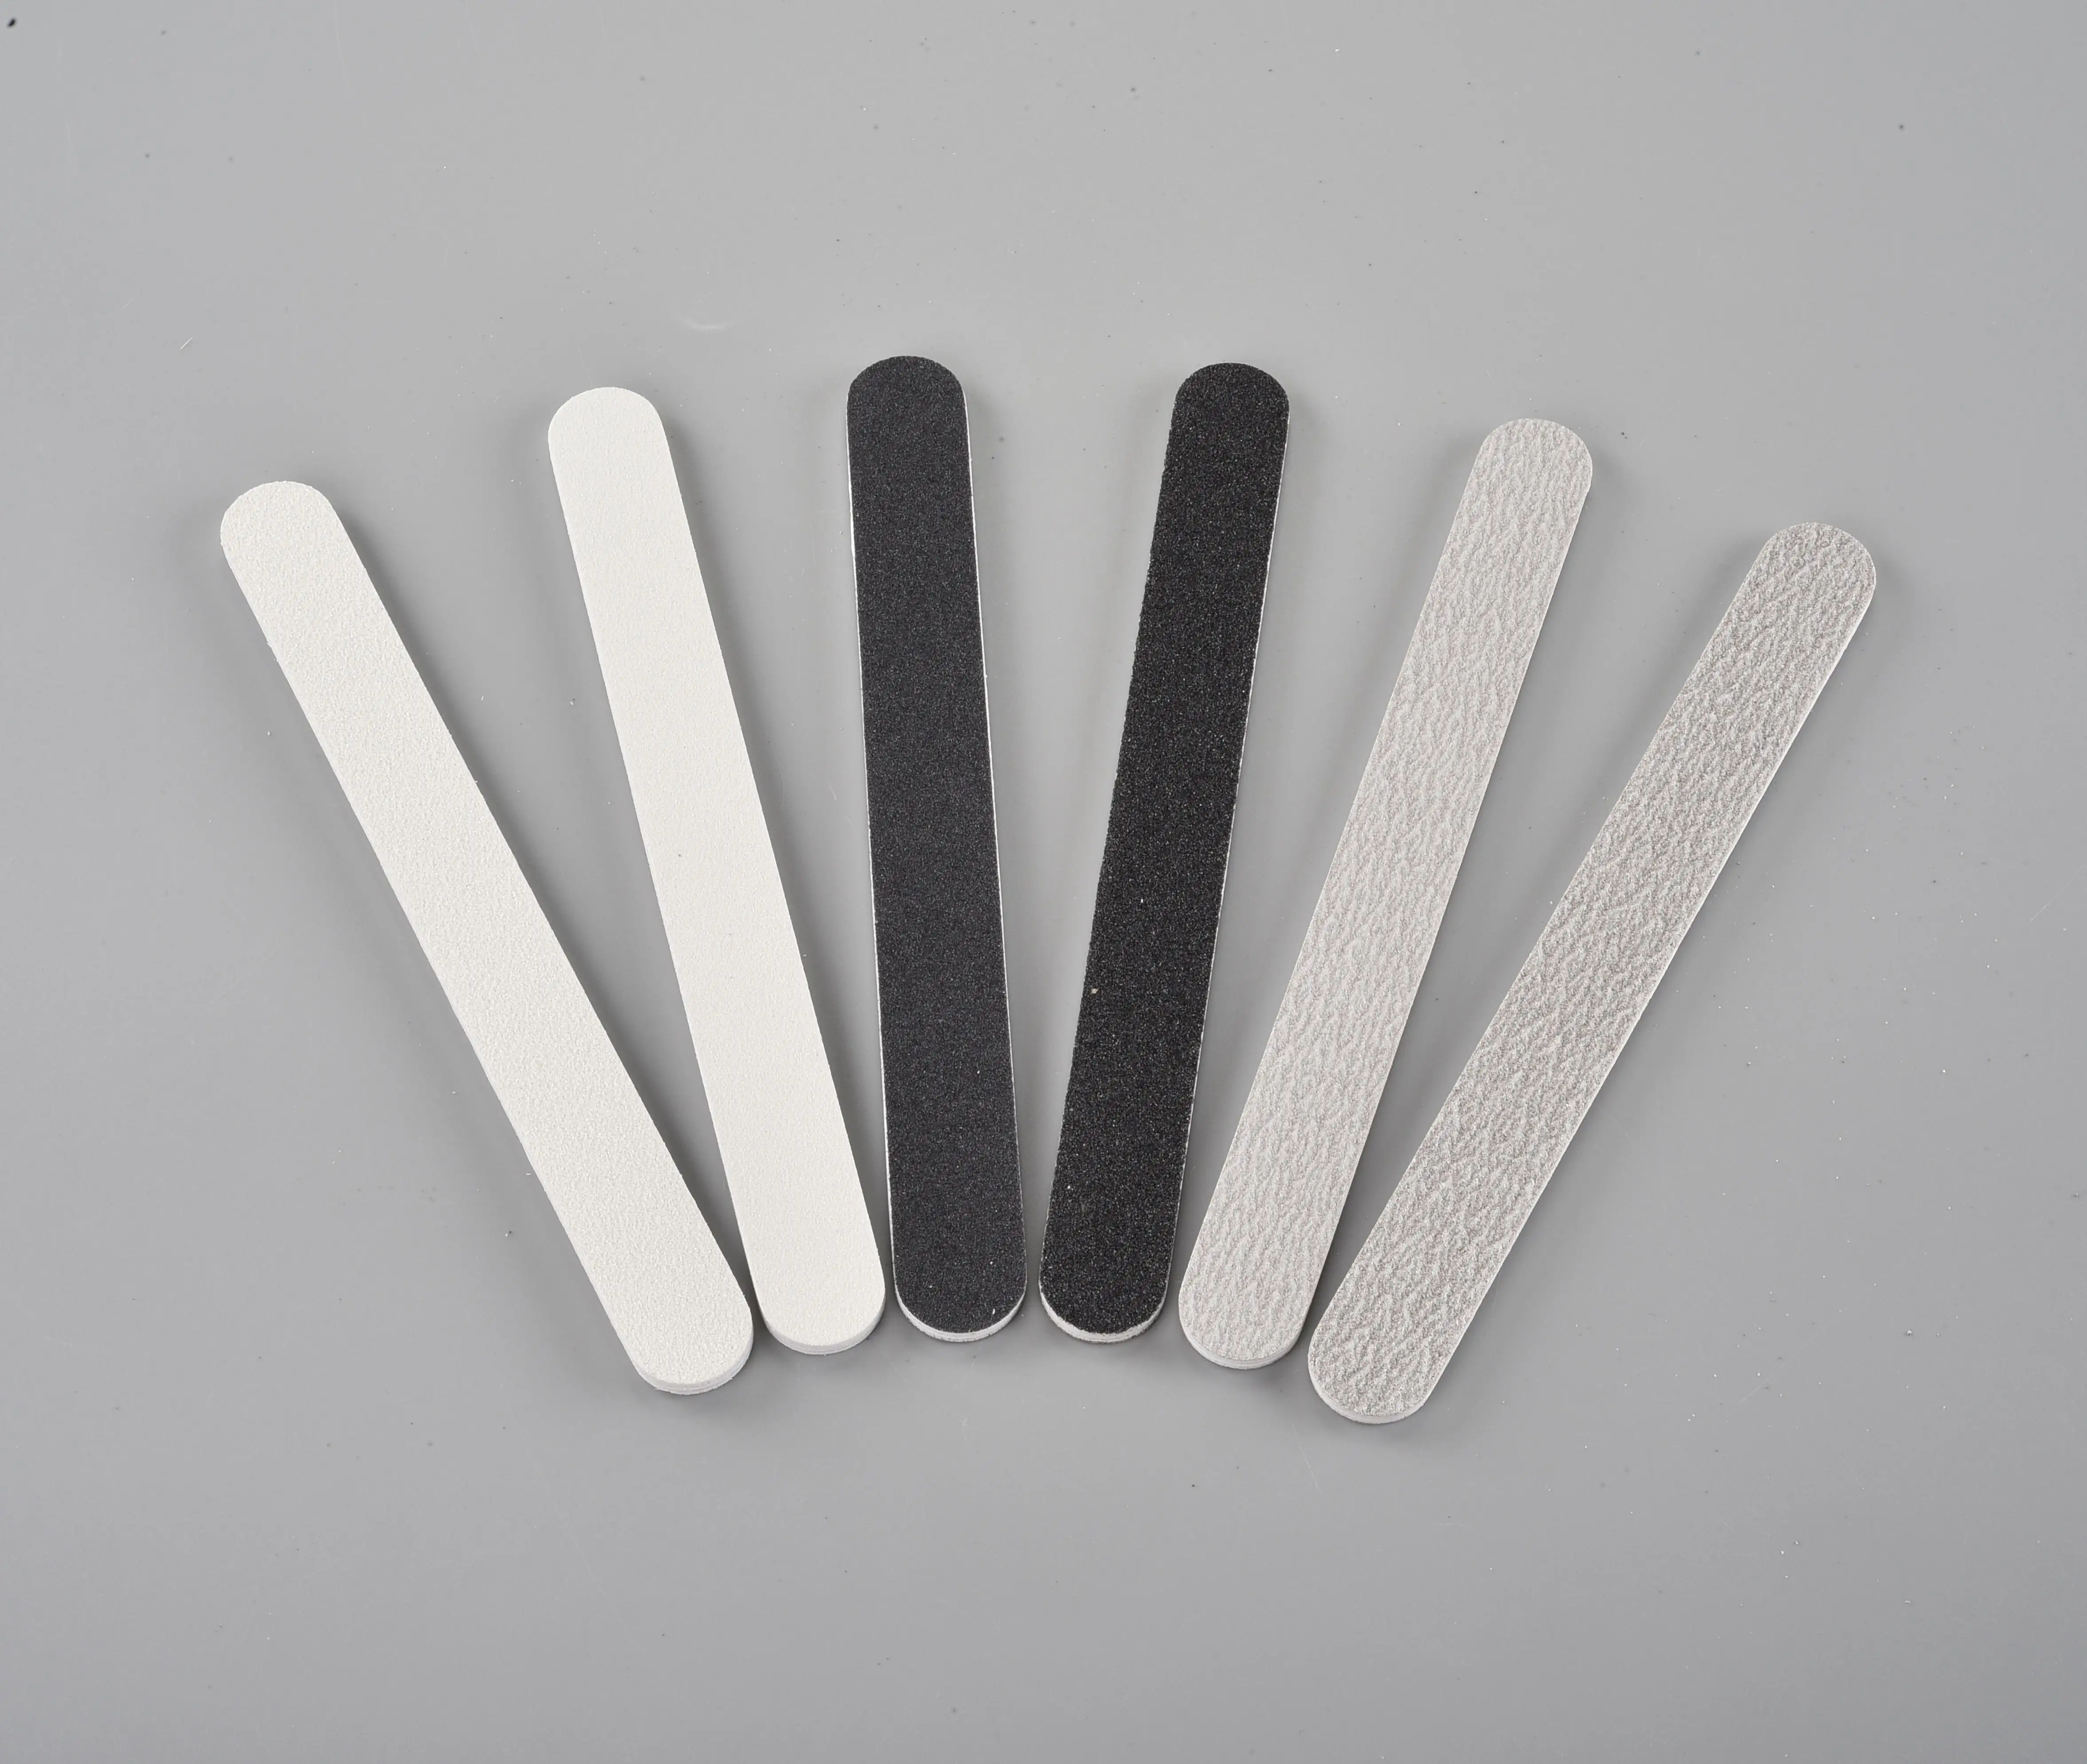 Wholesale Manicure OEM High Quality Plastic Nail File Grit 80/80 80/100 100/100 Durable Nail Files